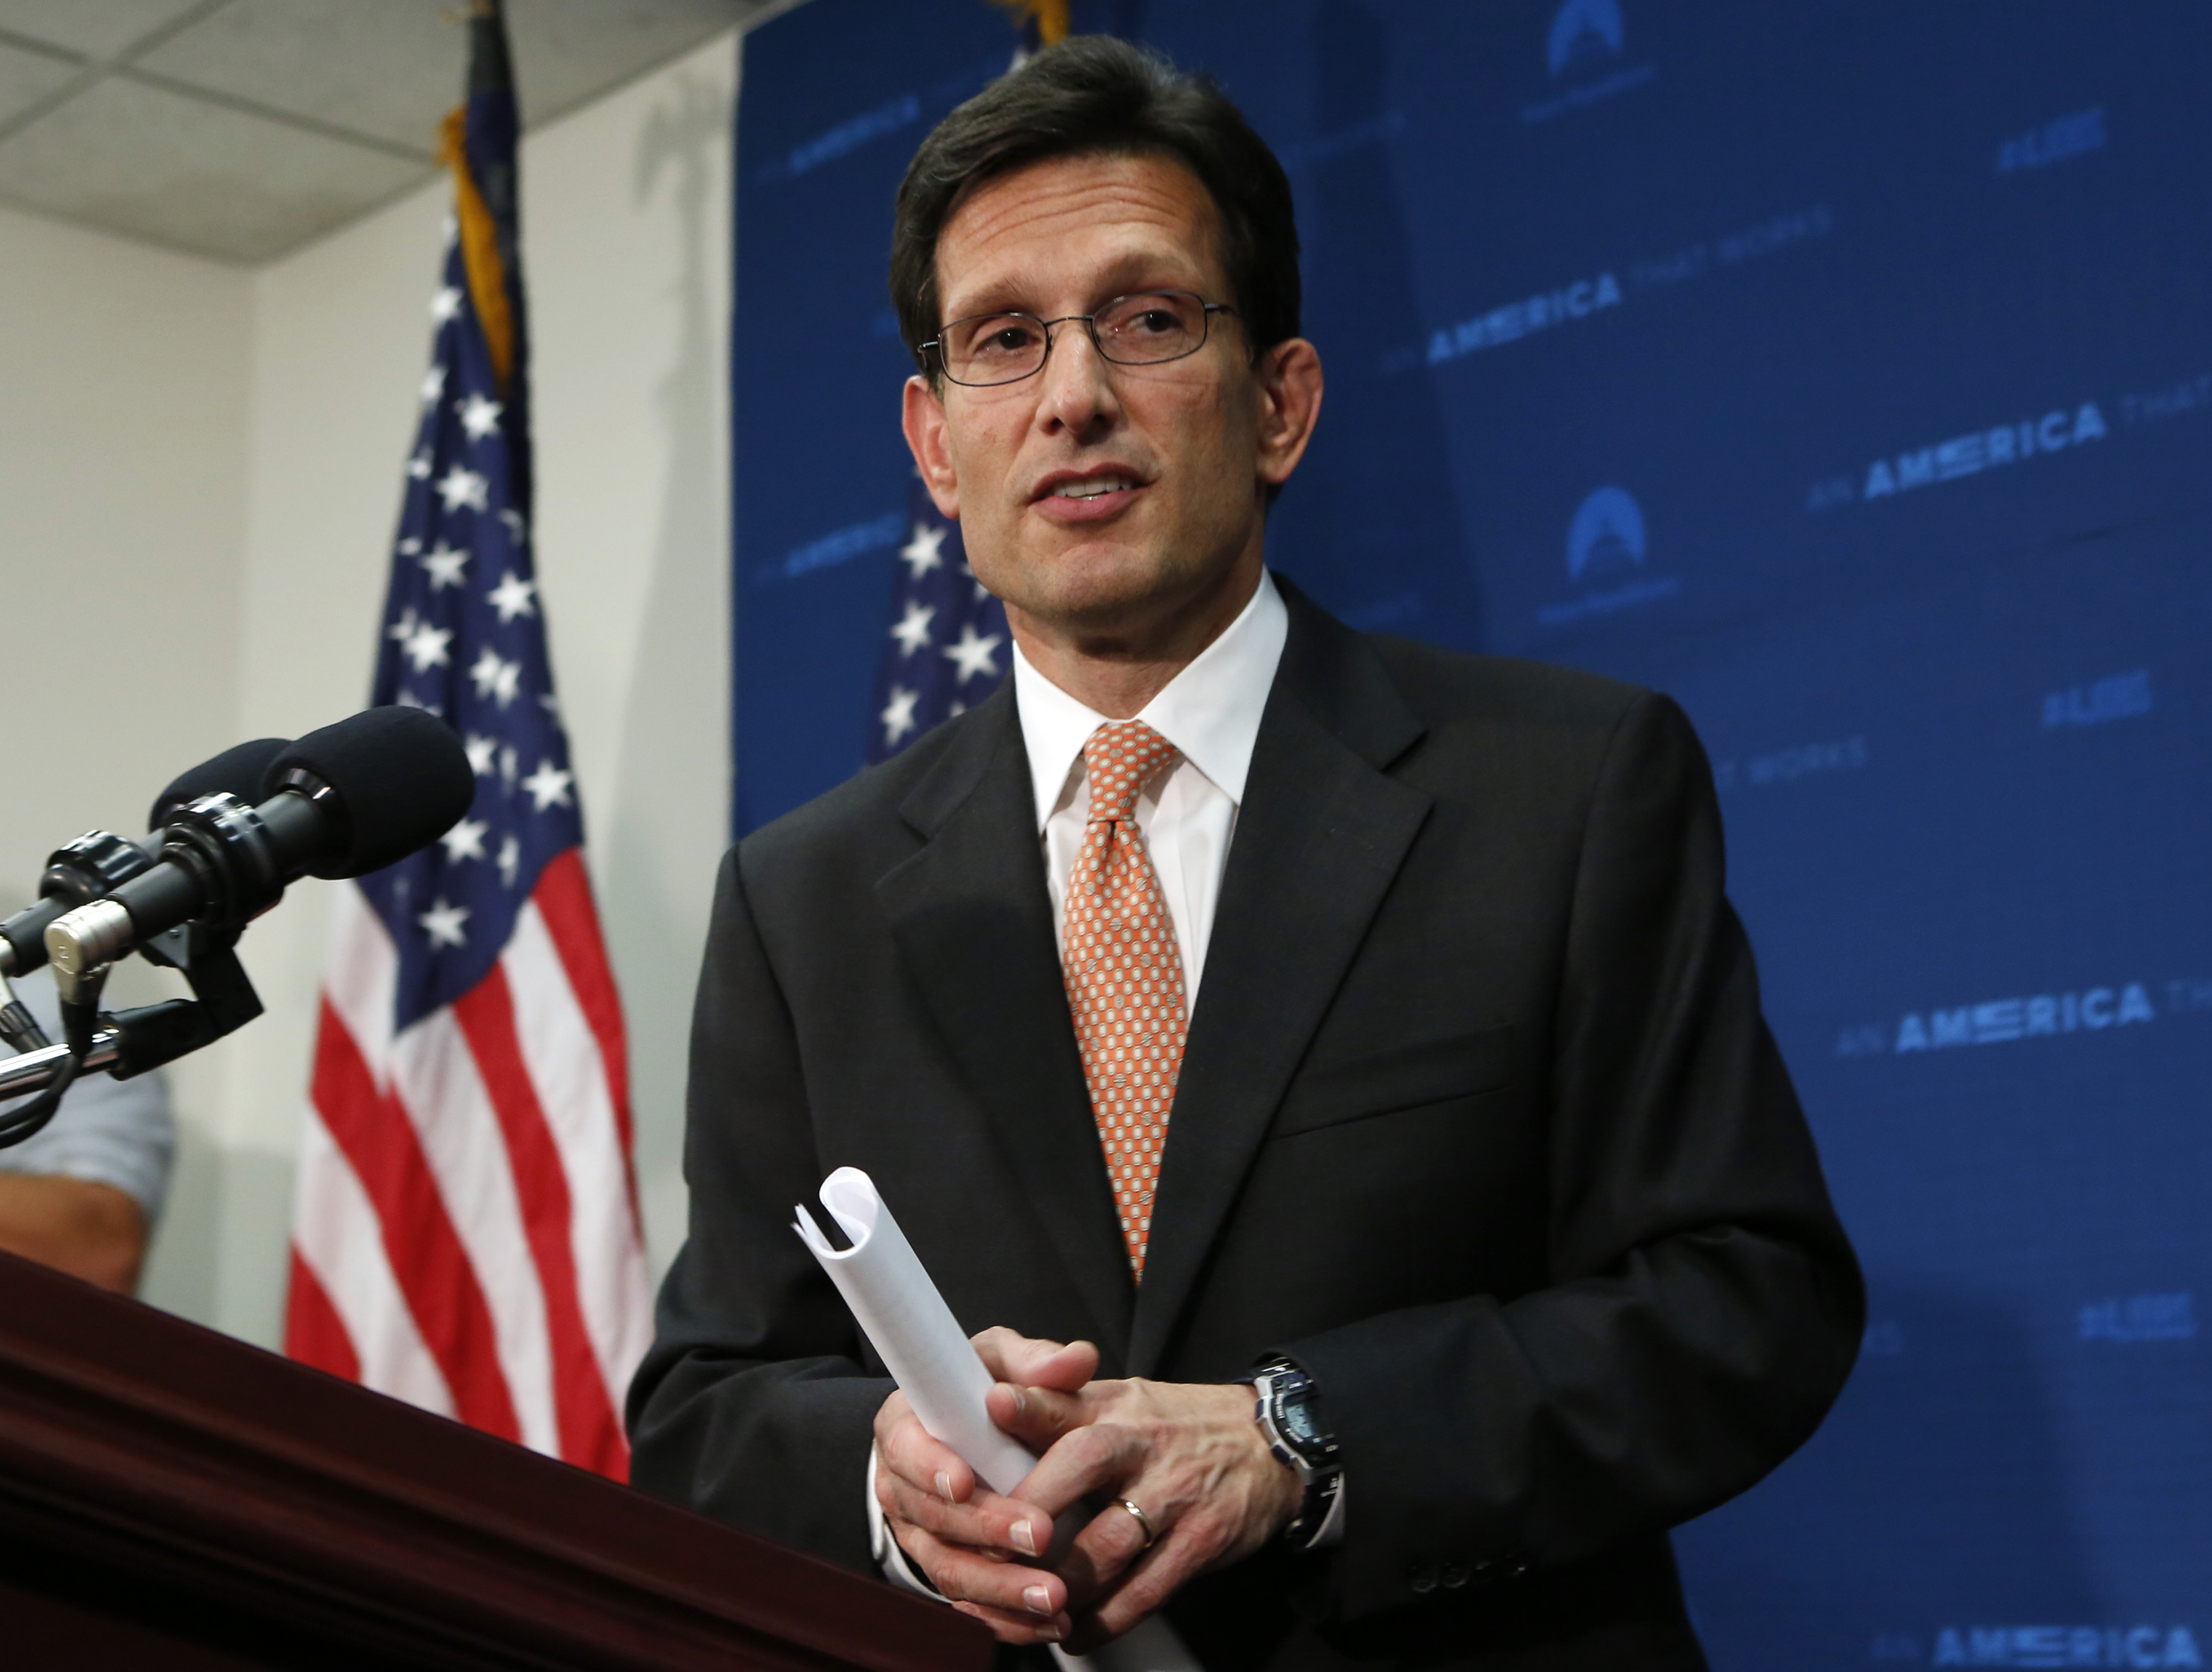 U.S. House Majority Leader Eric Cantor (R-VA) leaves after a news conference at the U.S. Capitol in Washington June 11, 2014 (Yuri Gripas—Reuters)